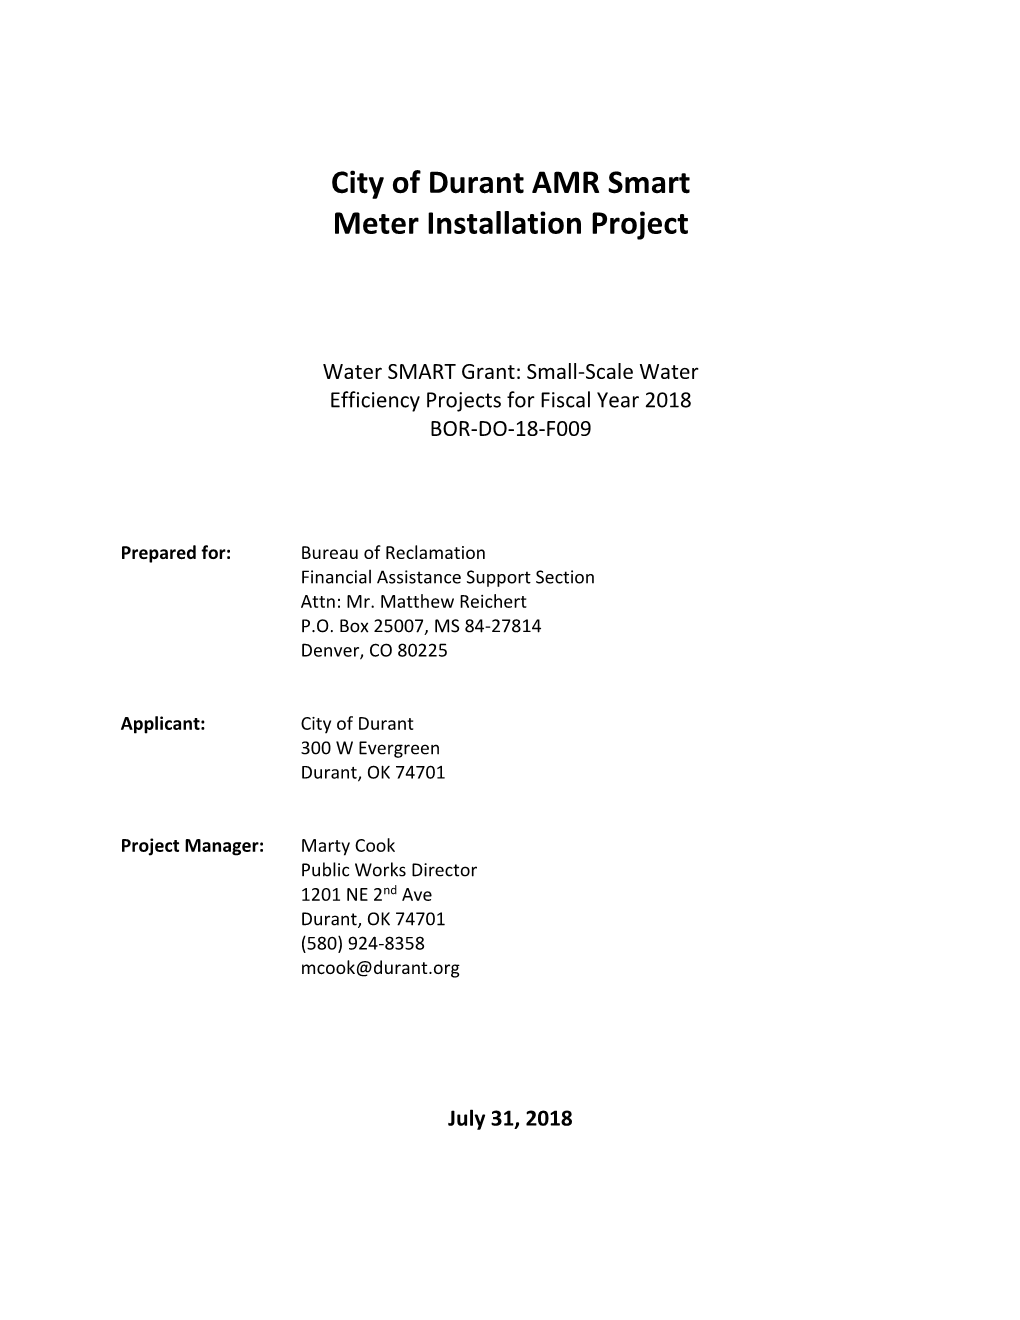 City of Durant AMR Smart Meter Installation Project